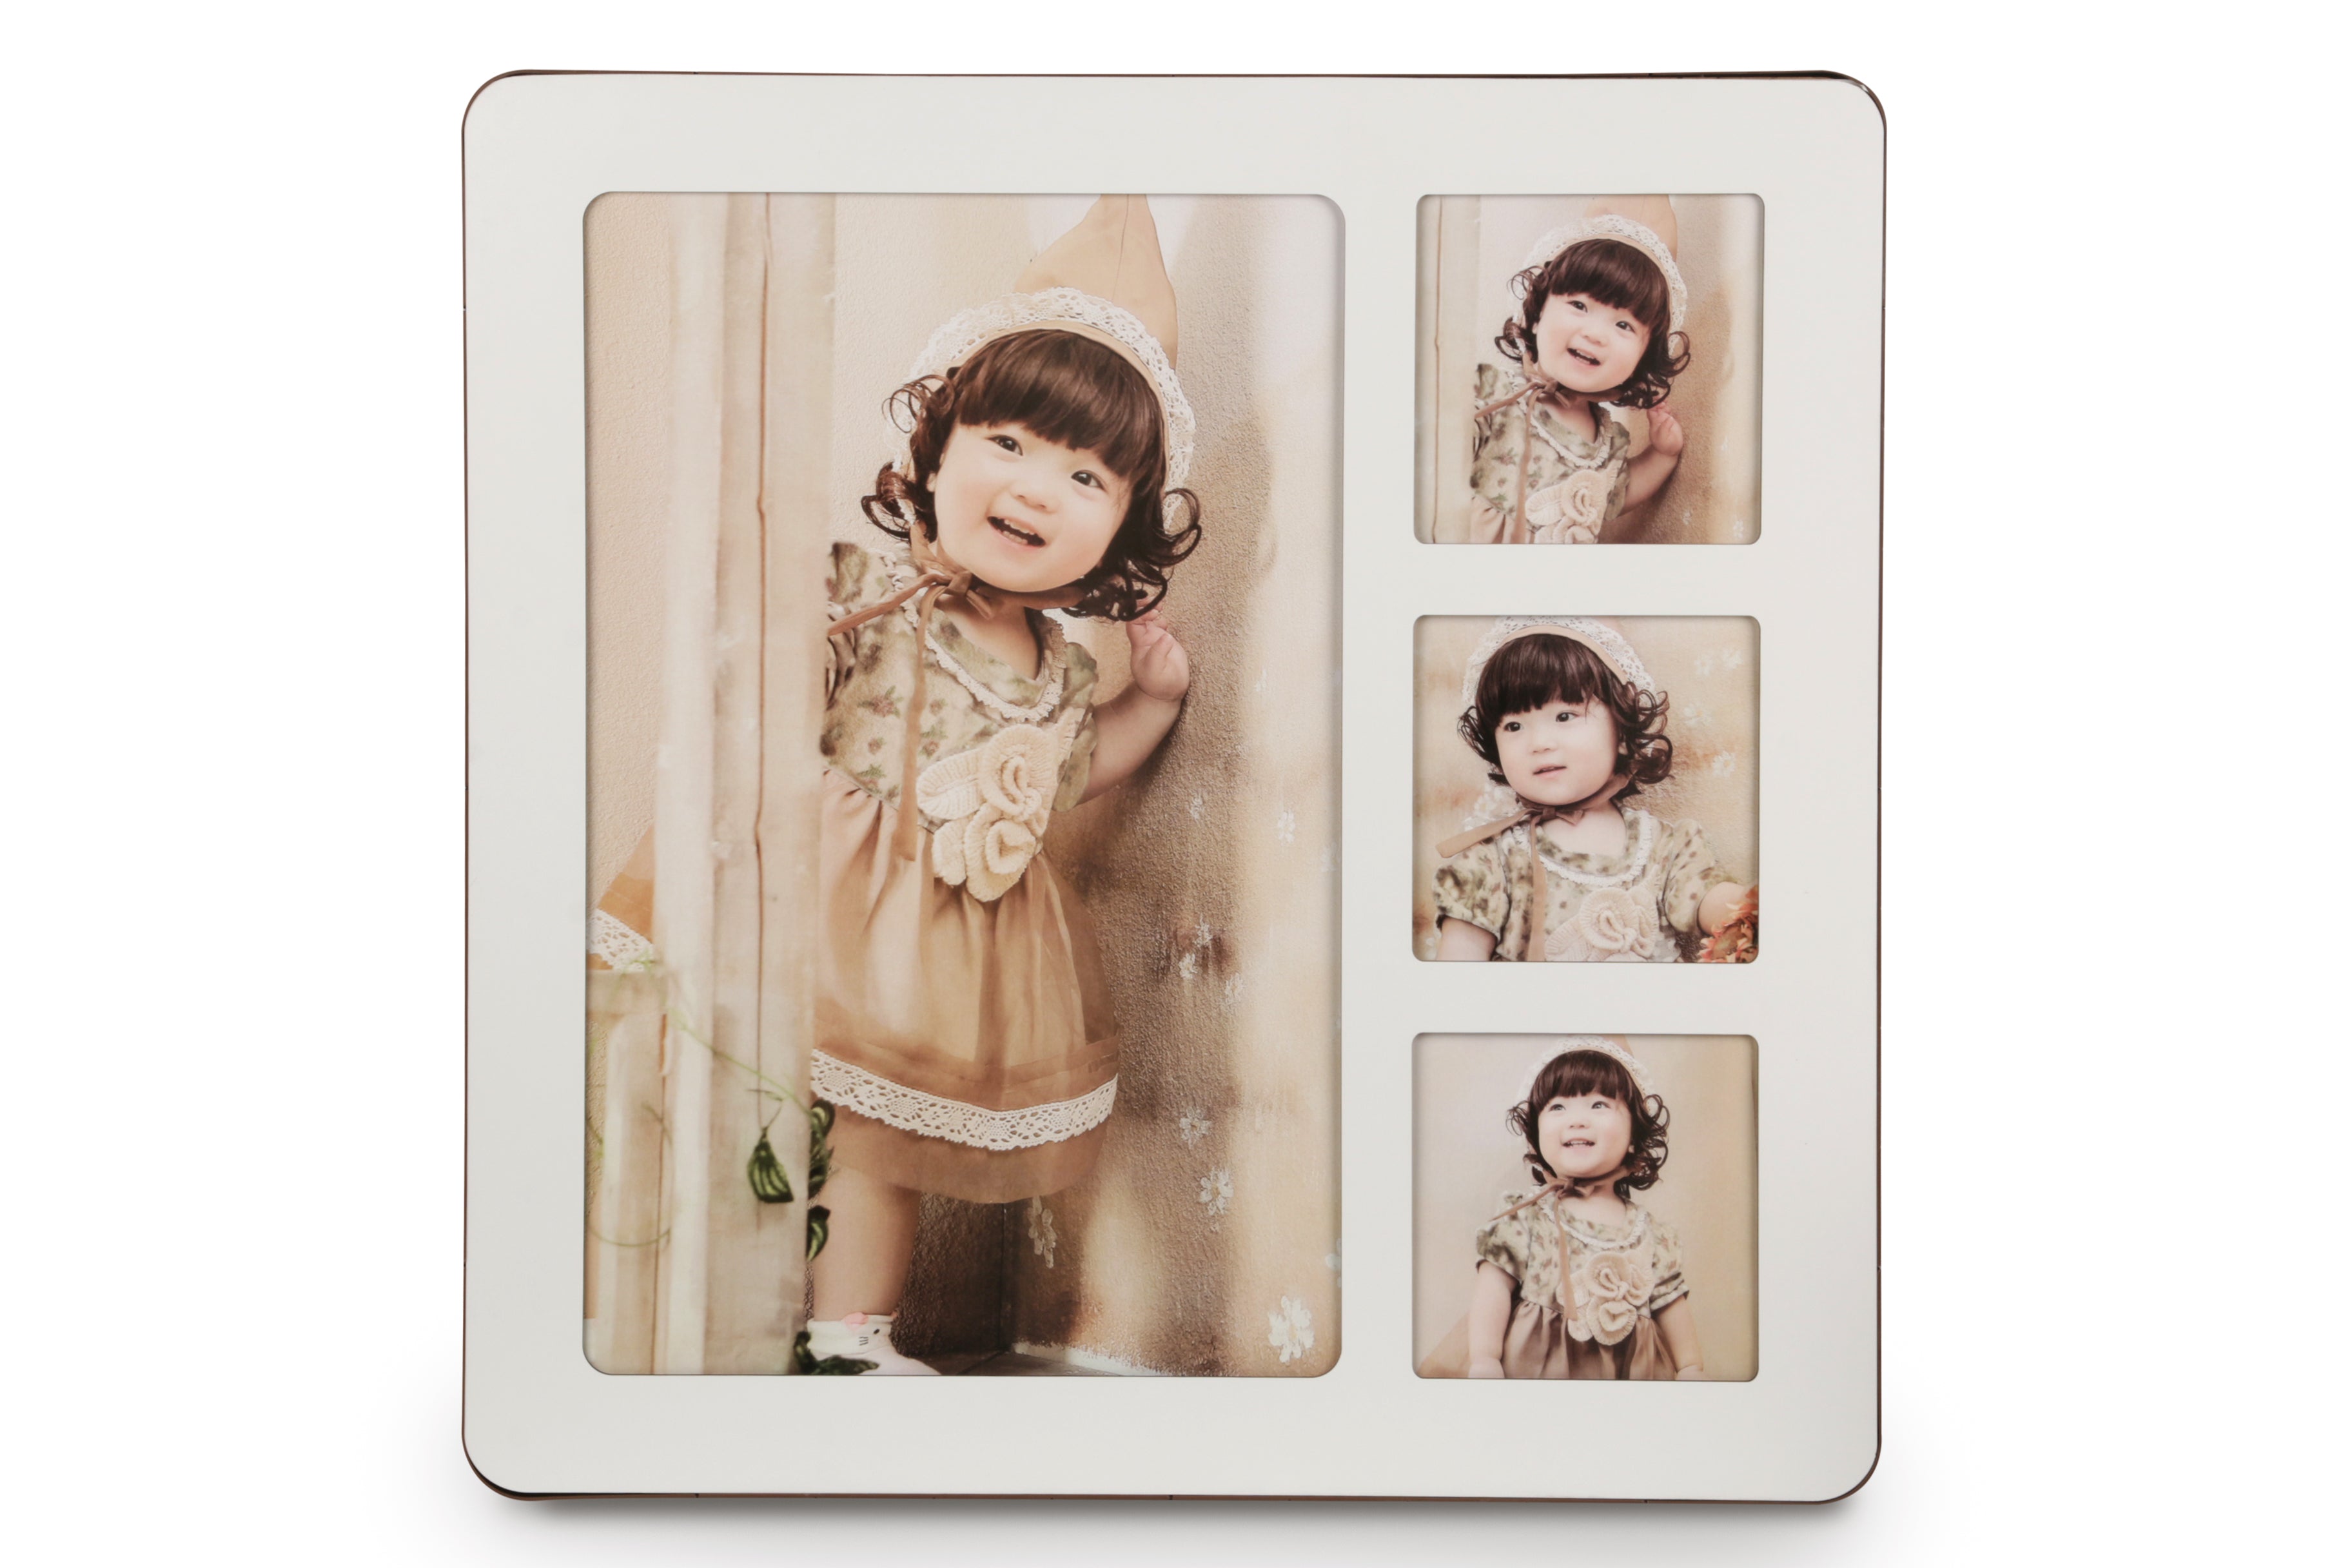 Urbancart® Wall Mounted Collage Picture Holder/Photo Display for Home Office (60 * 60 cm)(White)